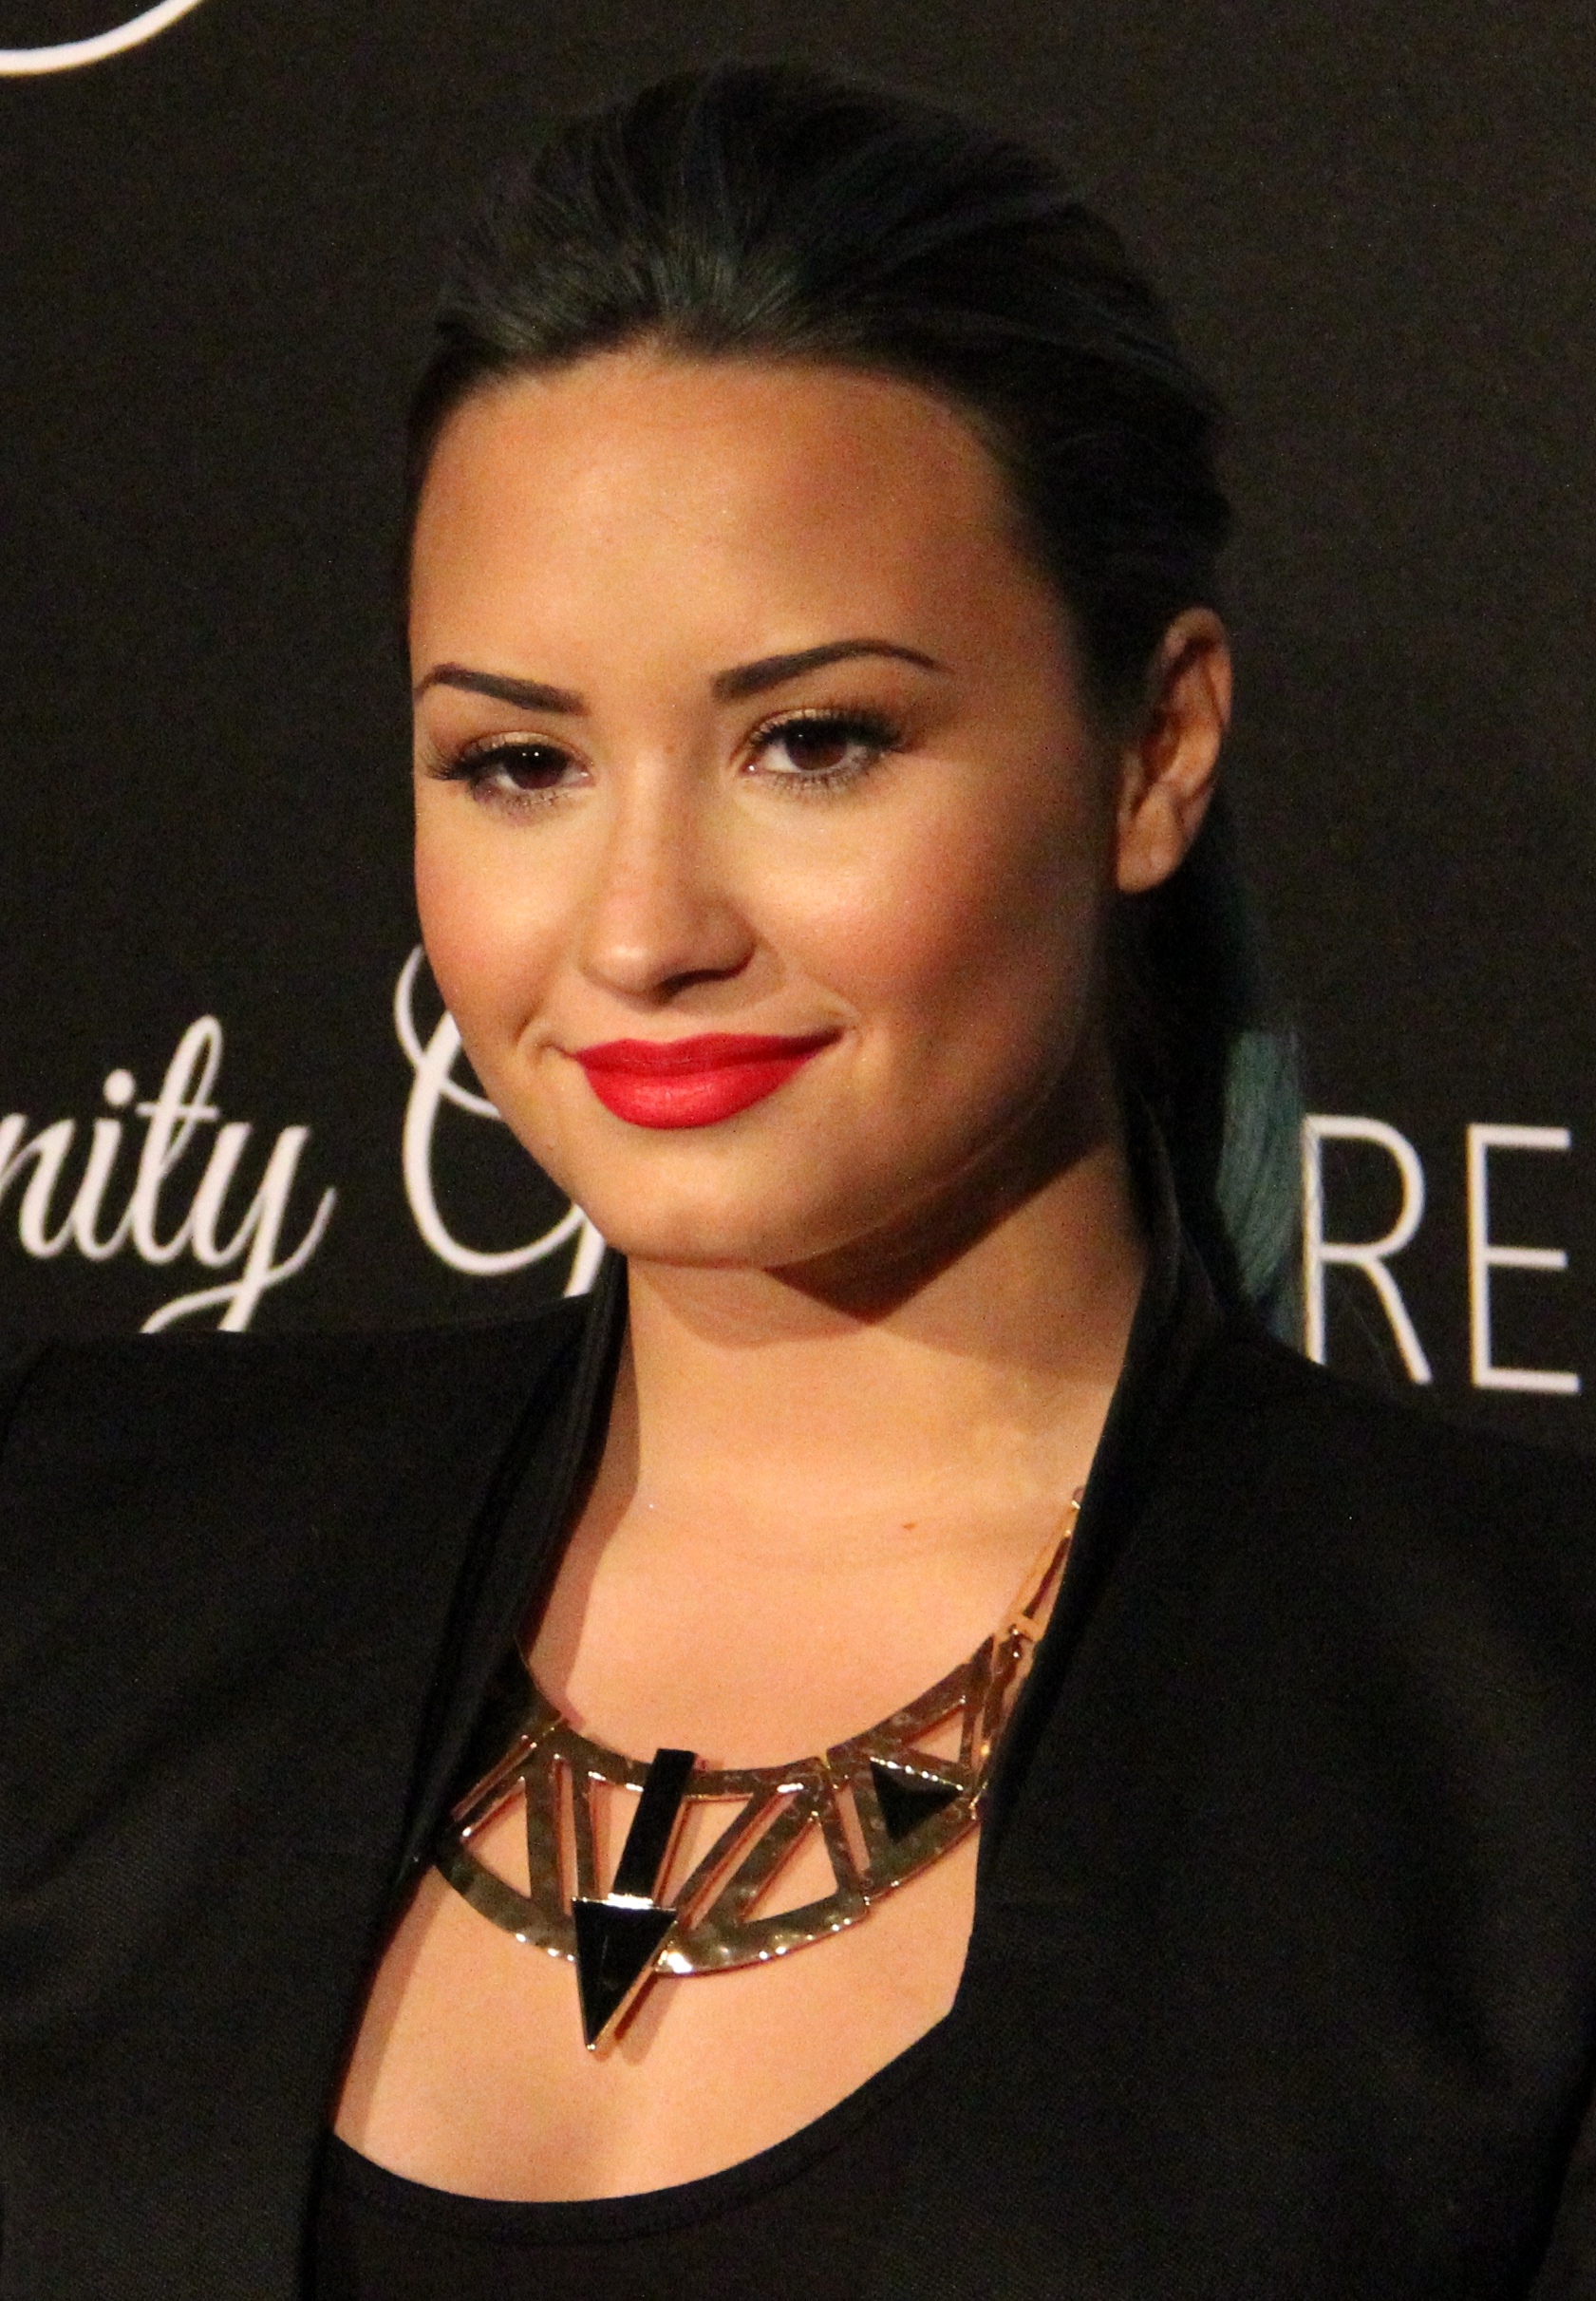 Demi Lovato, celebrity in eating disorder recovery